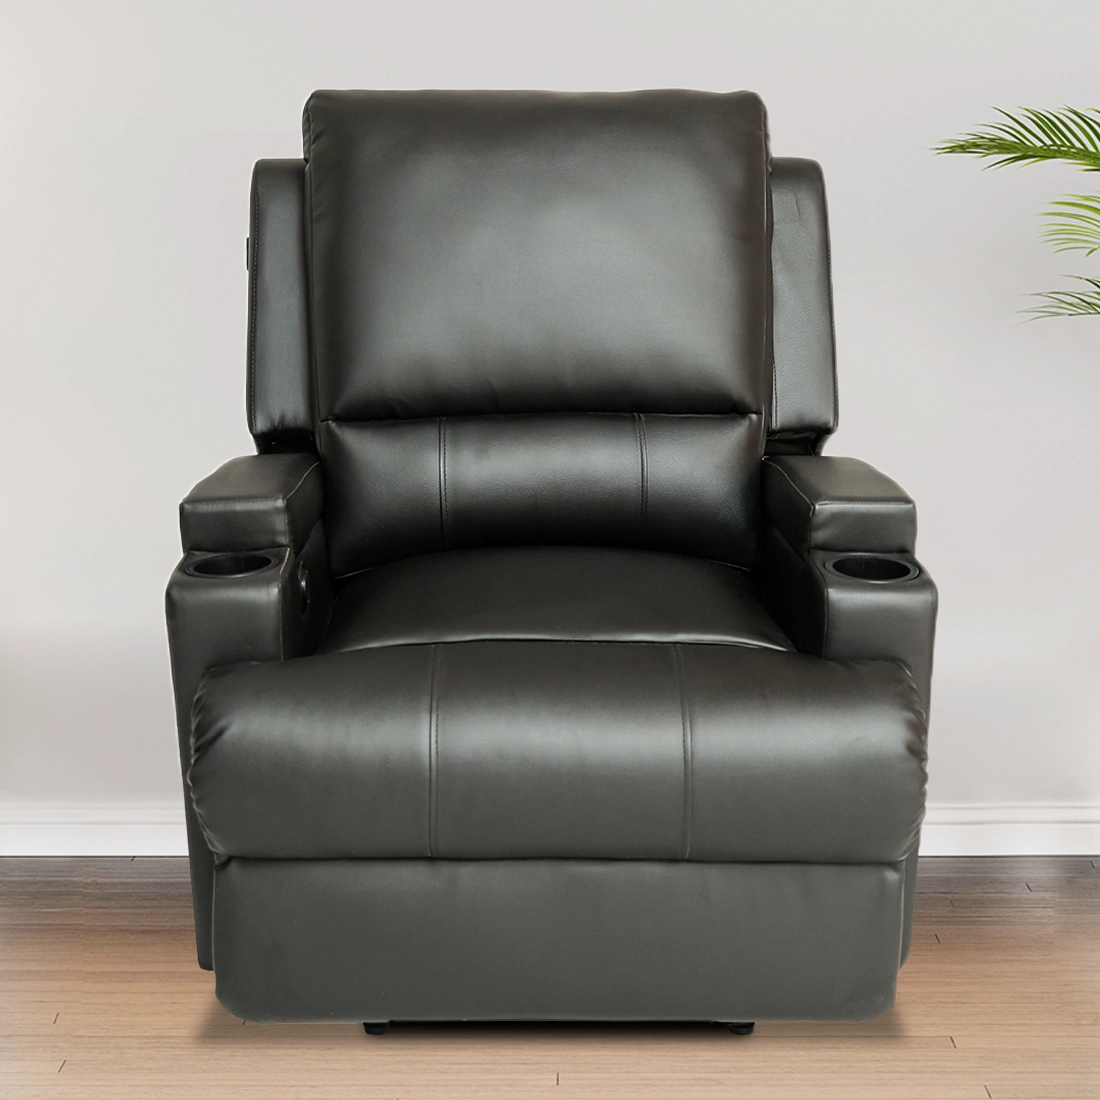 Recliner Chairs For Home Relax